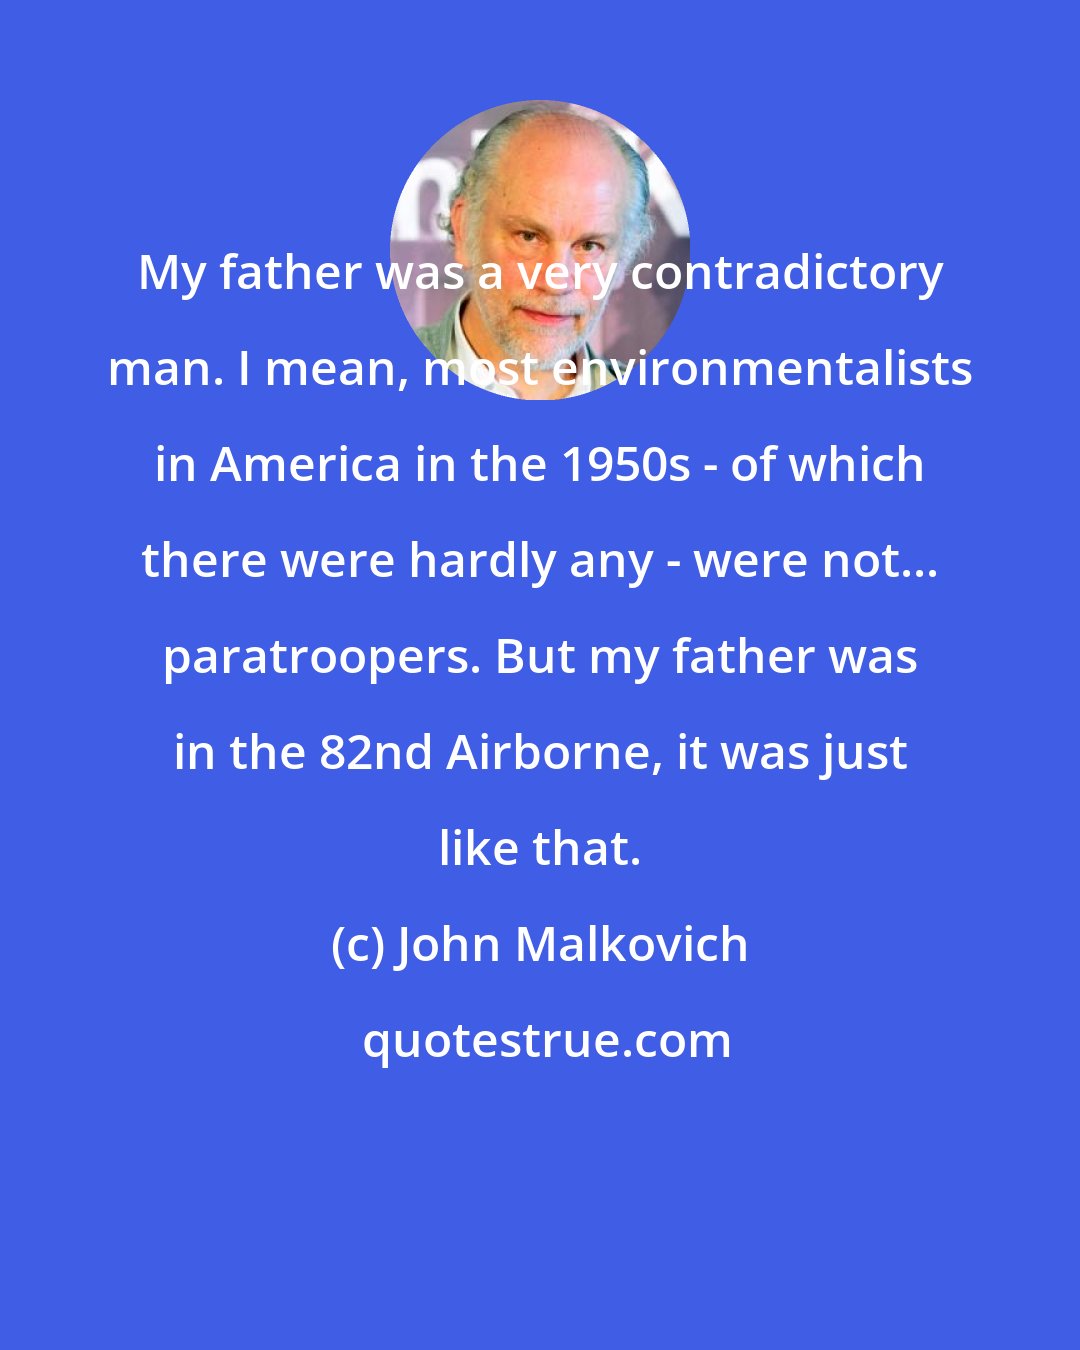 John Malkovich: My father was a very contradictory man. I mean, most environmentalists in America in the 1950s - of which there were hardly any - were not... paratroopers. But my father was in the 82nd Airborne, it was just like that.